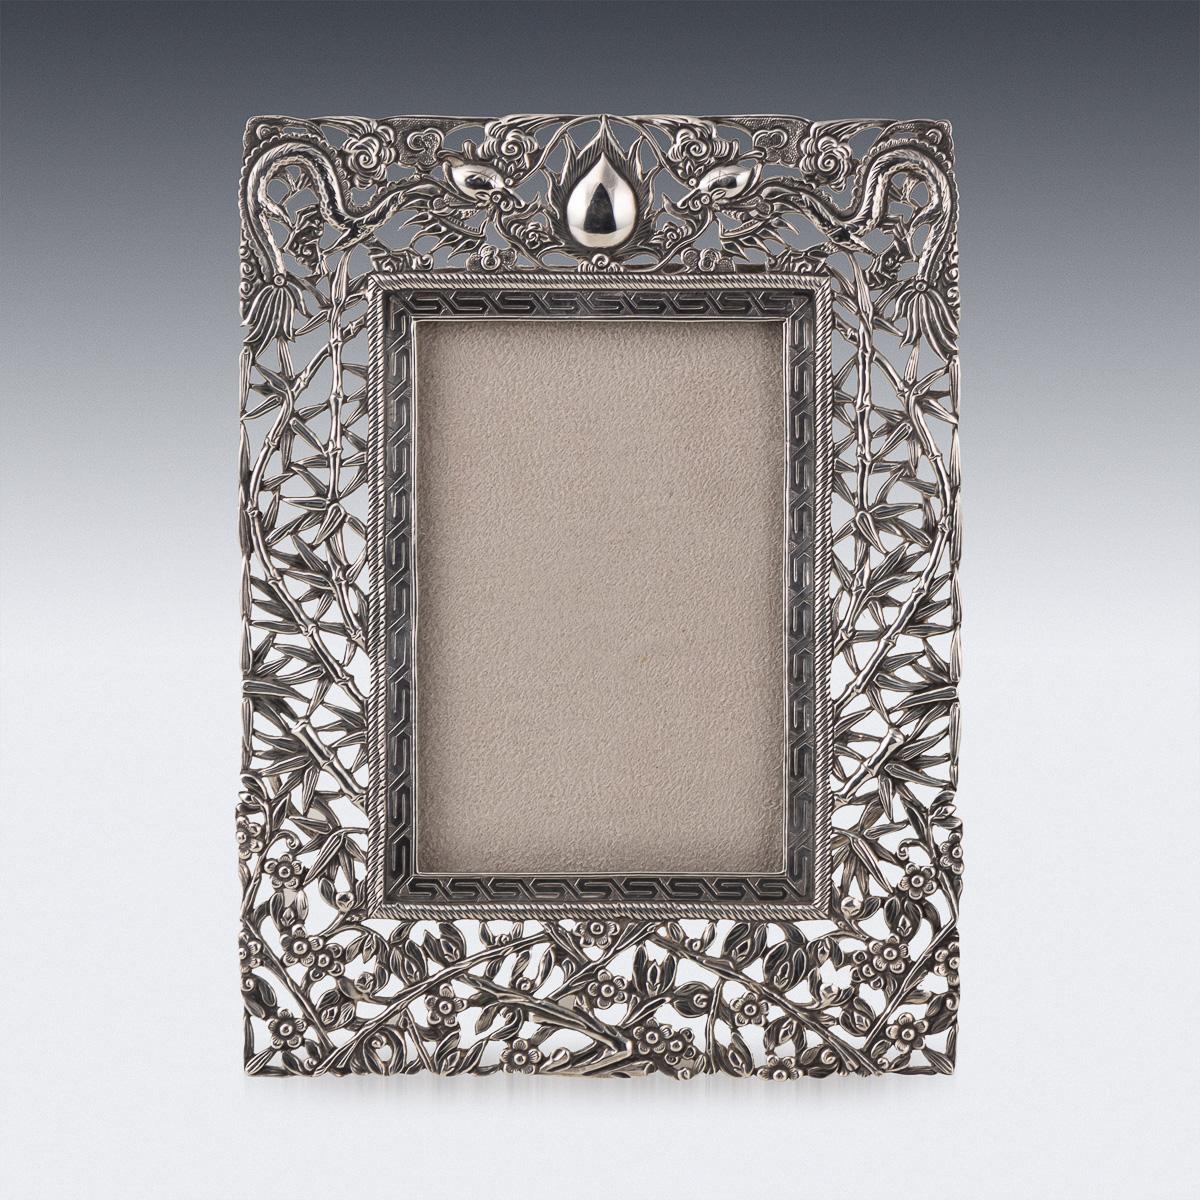 Antique 19th Century Chinese export solid silver picture frame, of rectangular form, with chased decoration and pierced in high relief, depicting various illustrated flowers, bamboo and two dragons. There is a geometric pattern surrounding the glass